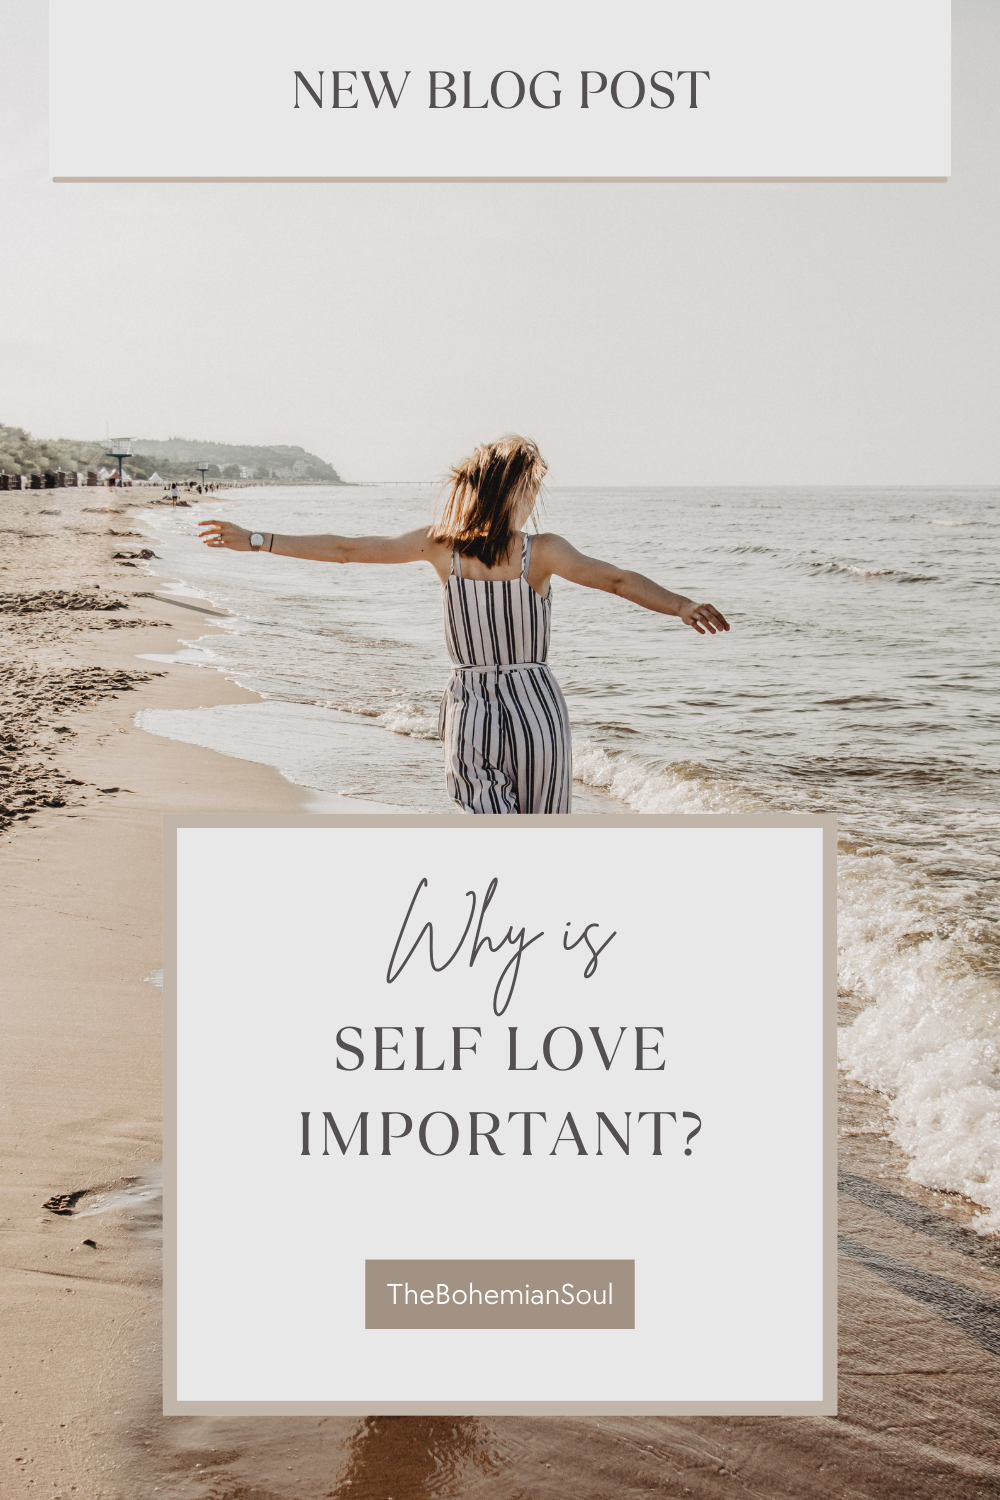 Why is self love important?